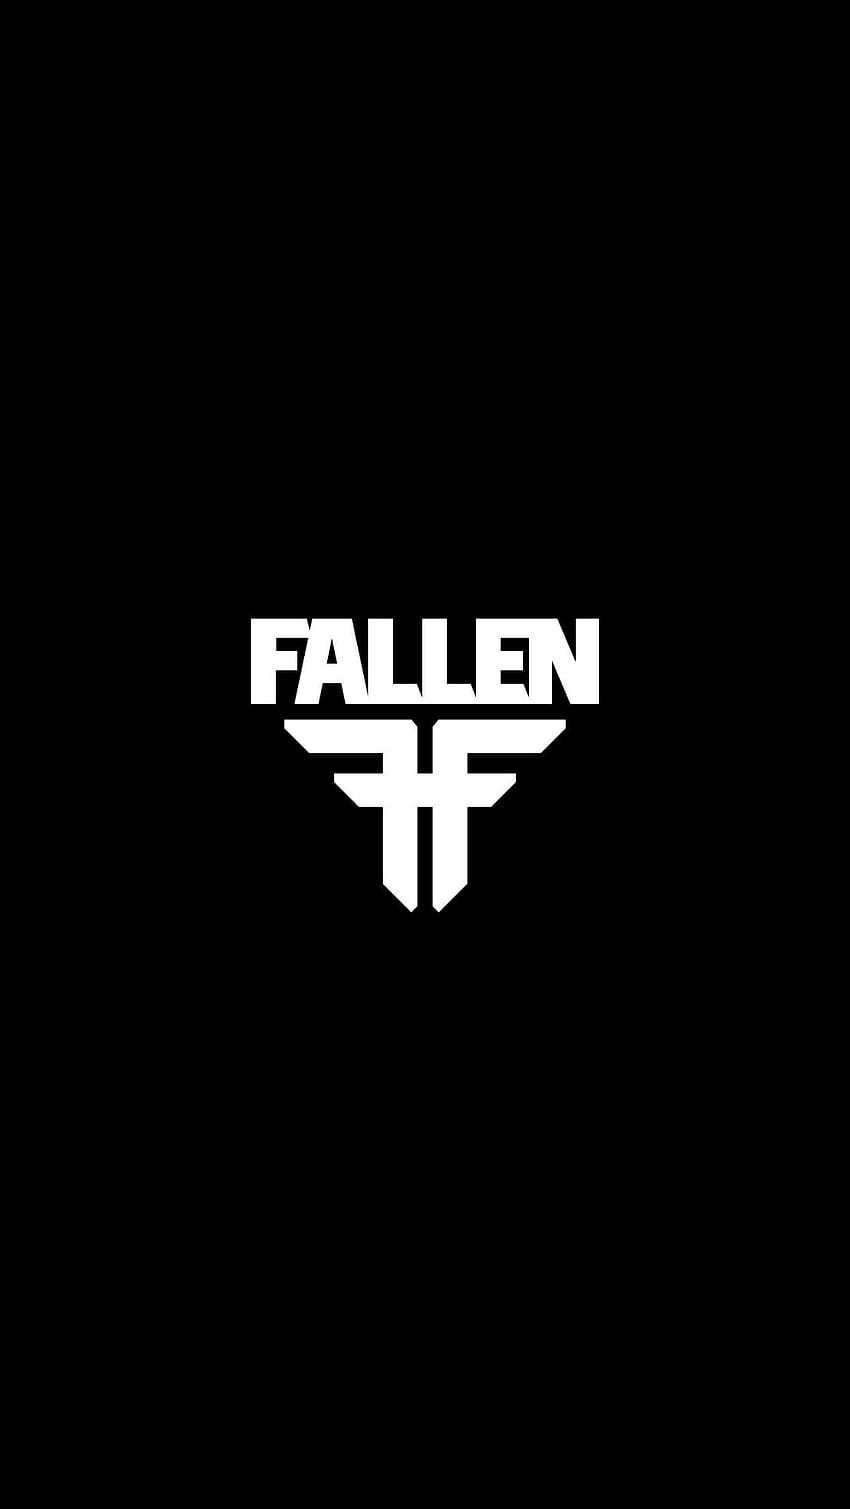 I like how for the Fallen logo It makes me feel like there's been a fallen angle. The two F's reflected remind me of to wings, and fallen with two wings ... HD phone wallpaper